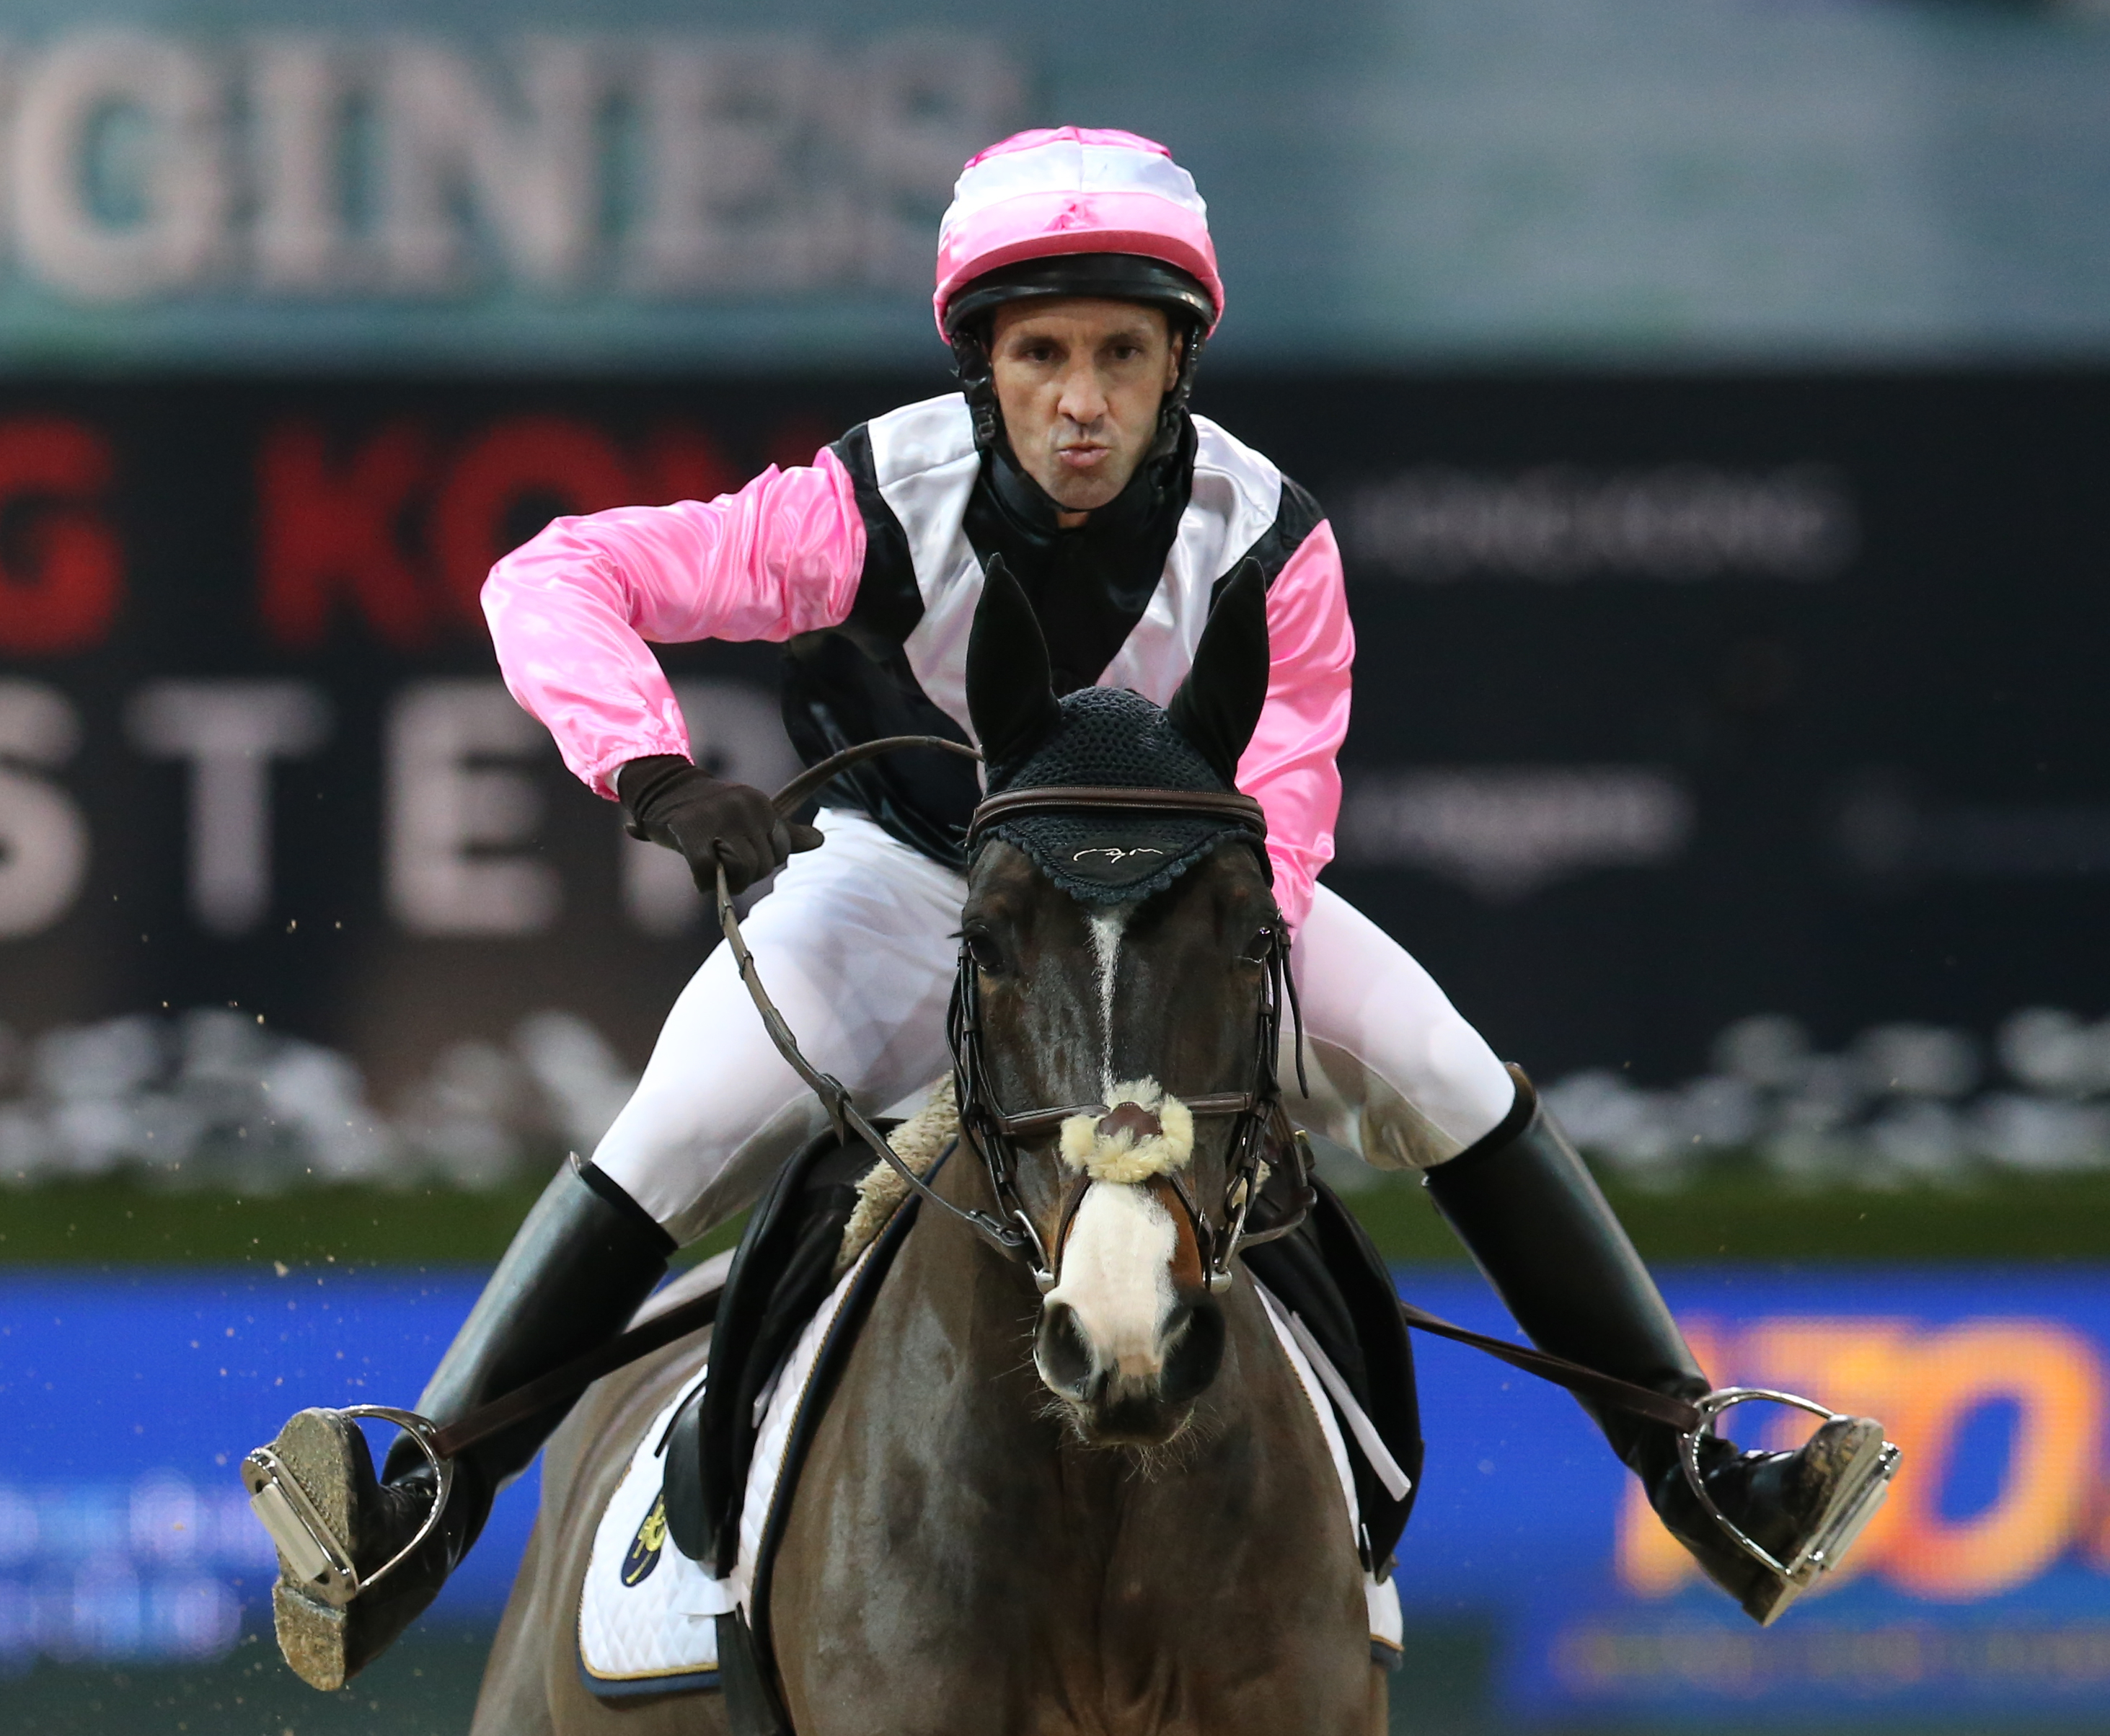 Irish jockey Neil Callan strikes an ungainly pose during the "Race of the Riders" at the Longines Hong Kong Masters at AsiaWorld-Expo. Photo: K.Y. Cheng